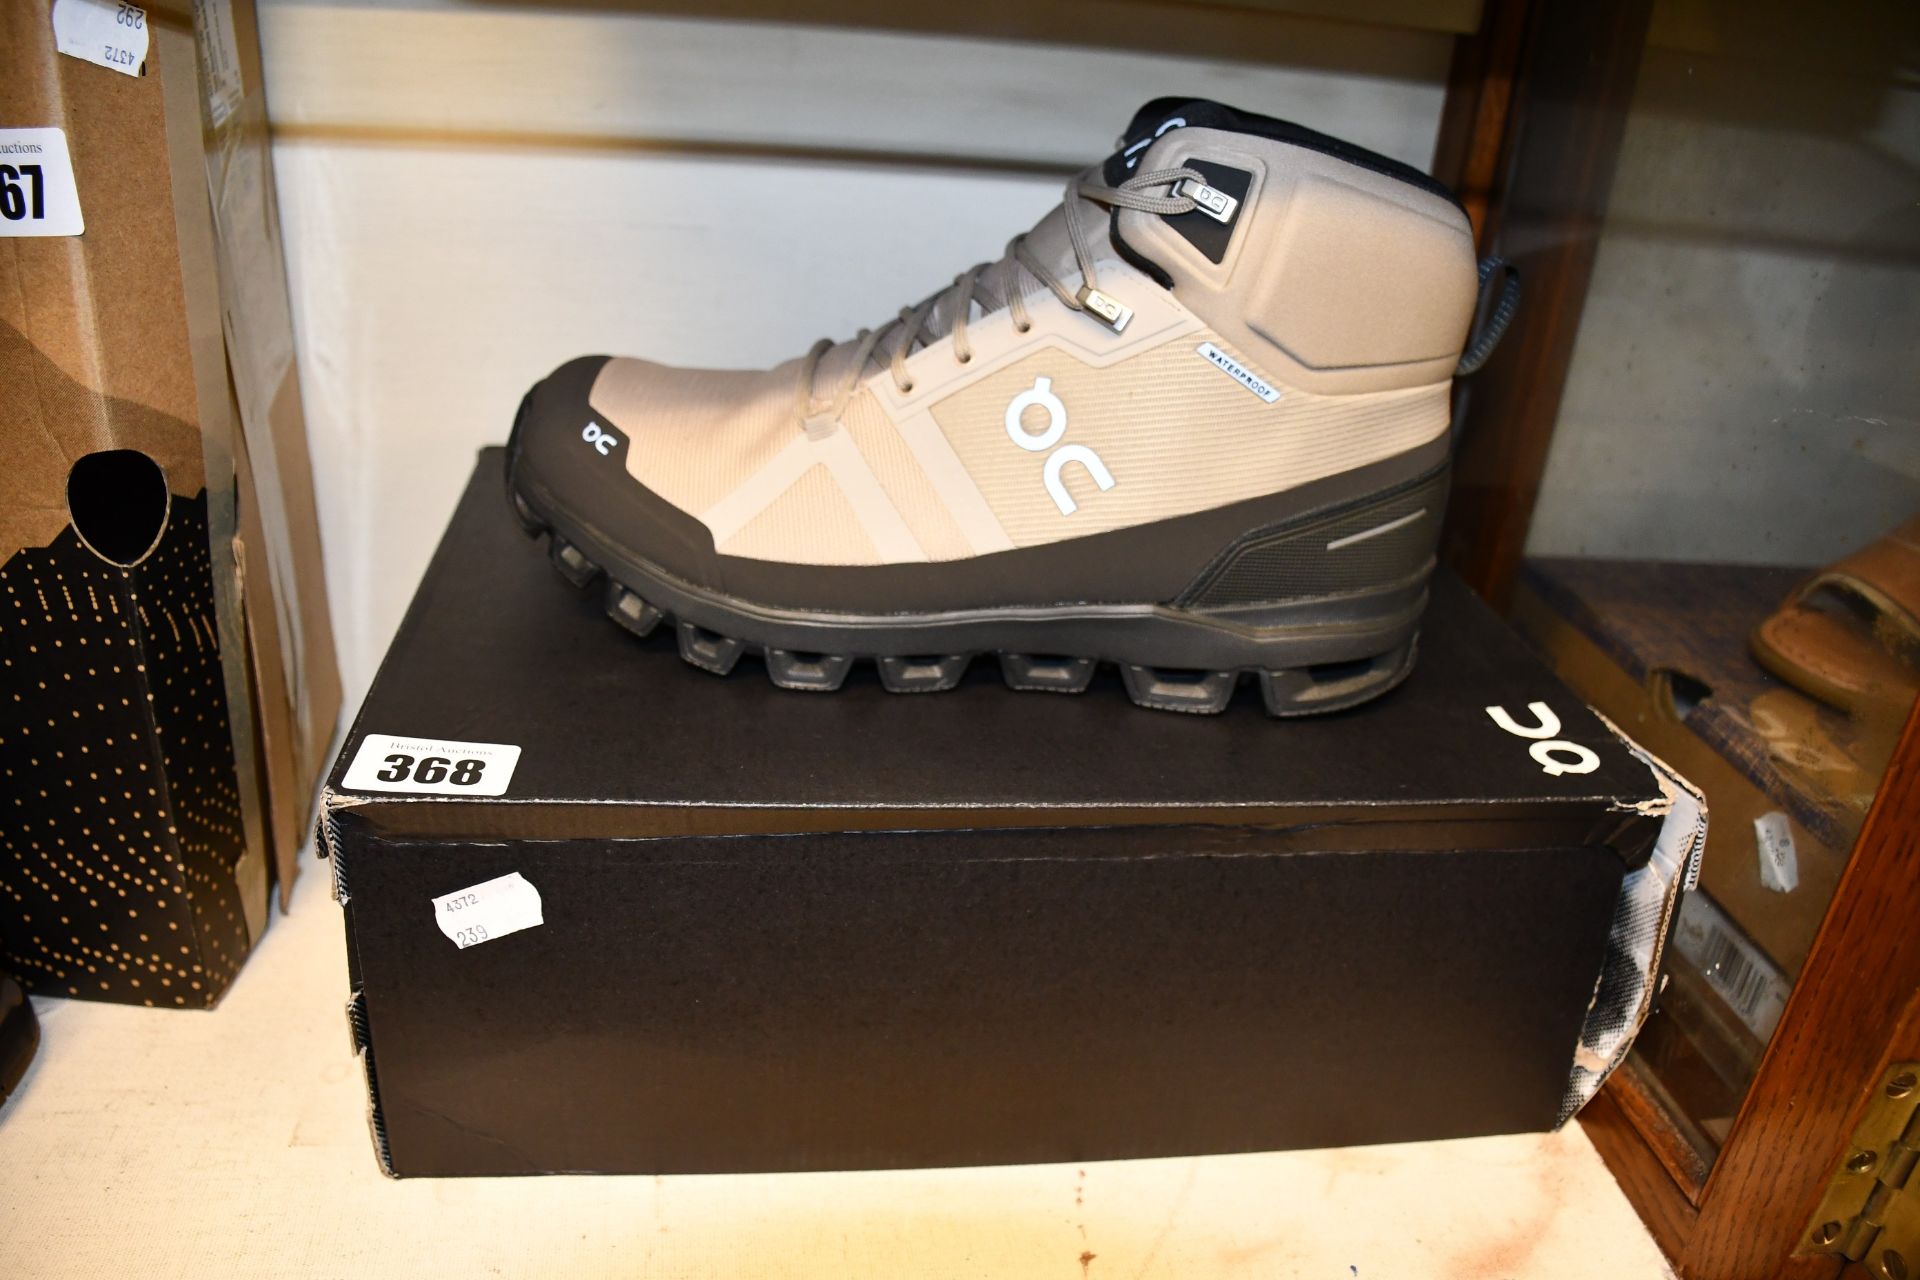 A pair of as new On Cloudrock Waterproof boots (UK 7.5 - RRP £180).